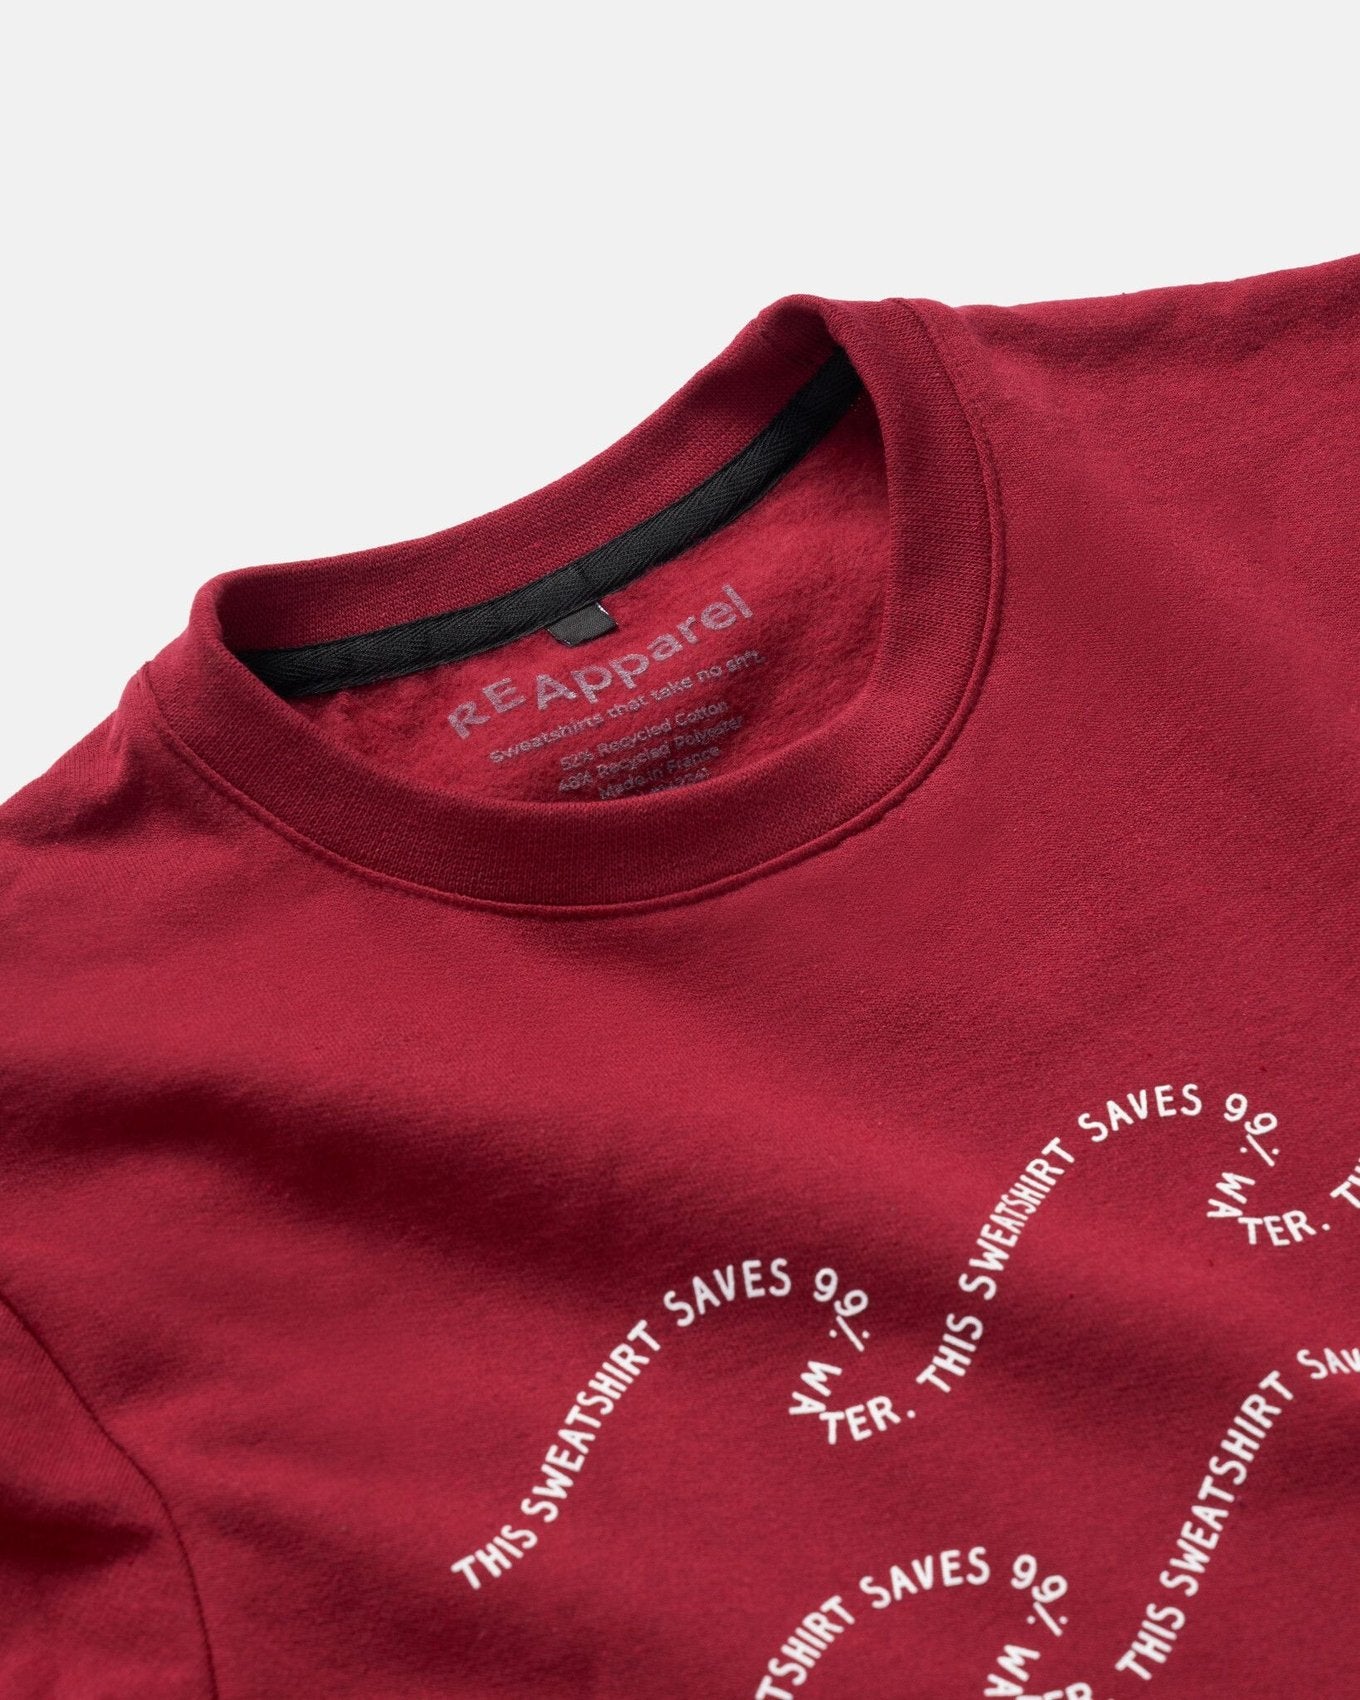 ReApparel Save Crew Neck . in color Garnet and shape long sleeve